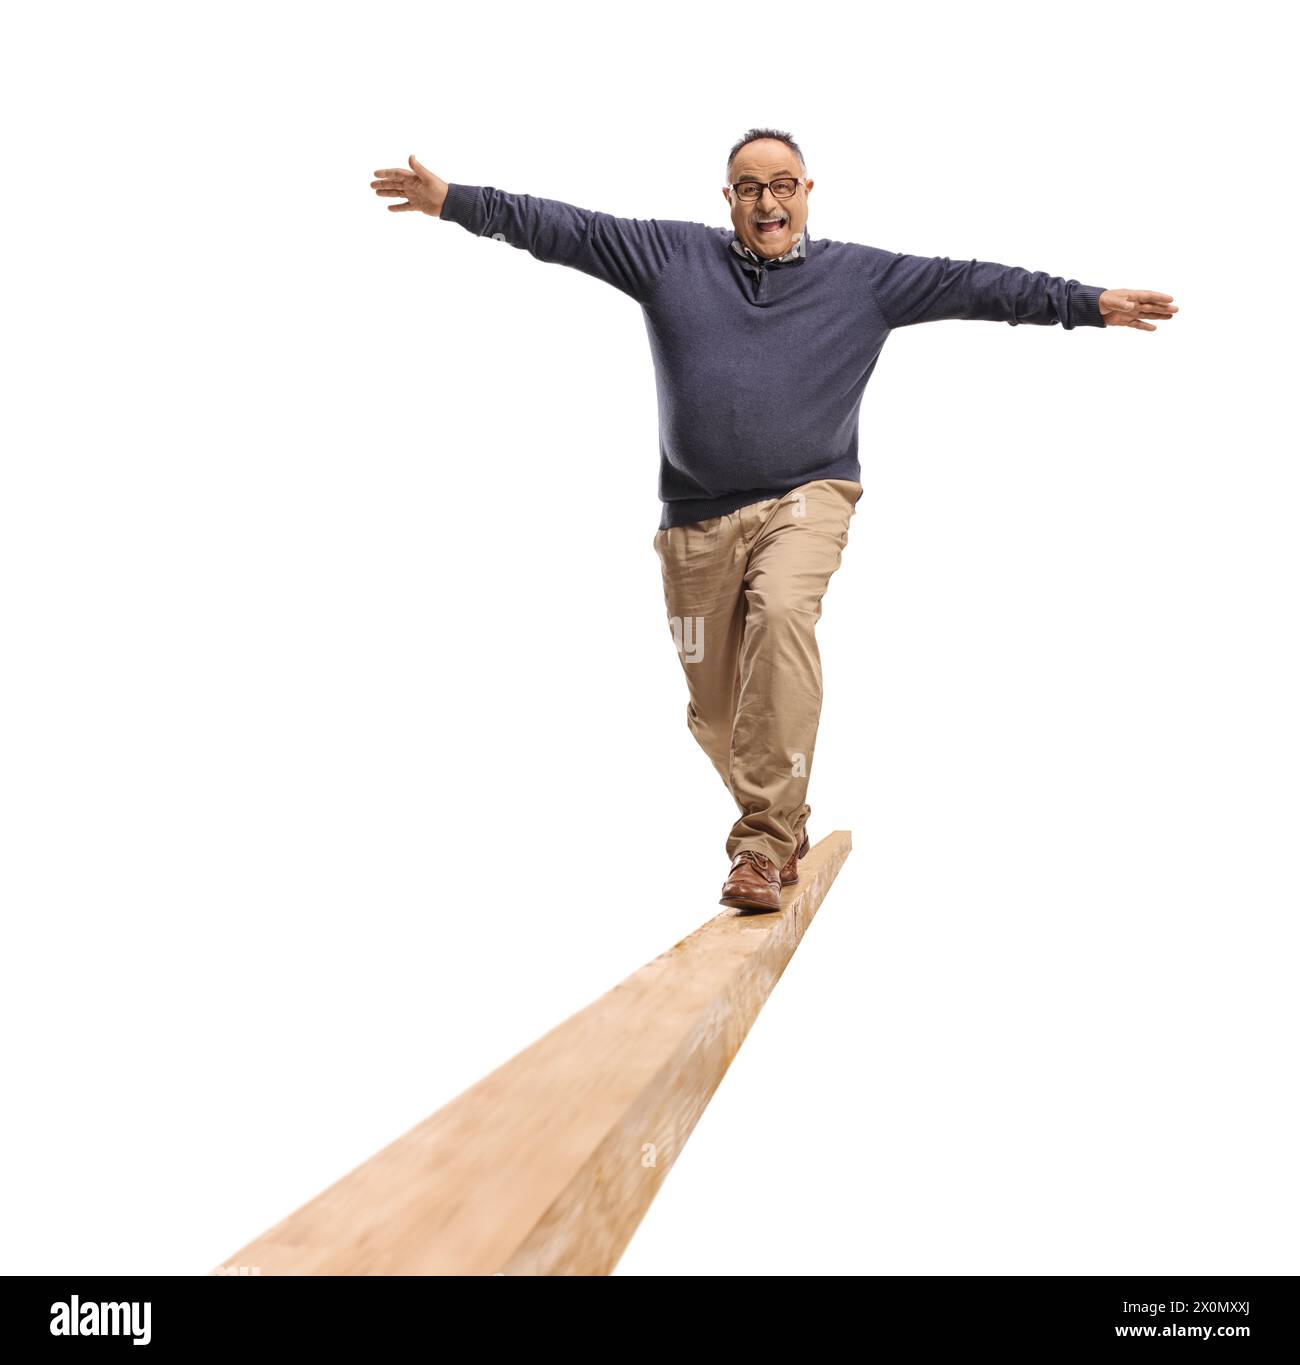 Full length portrait of a mature man walking on a wooden beam isolated on white background Stock Photo